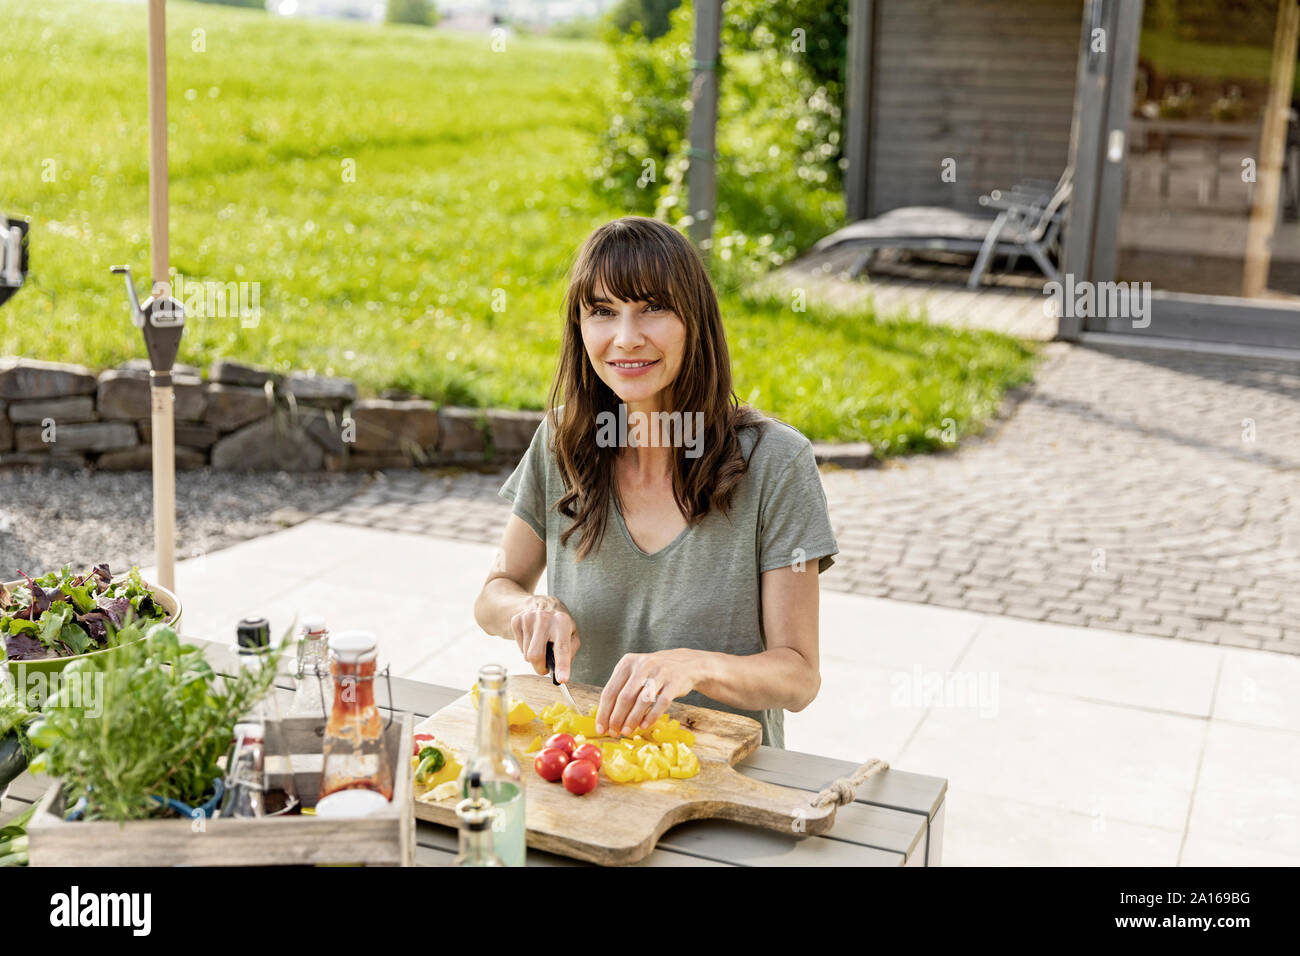 Portrait of smiling woman preparing a salad on garden table Stock Photo